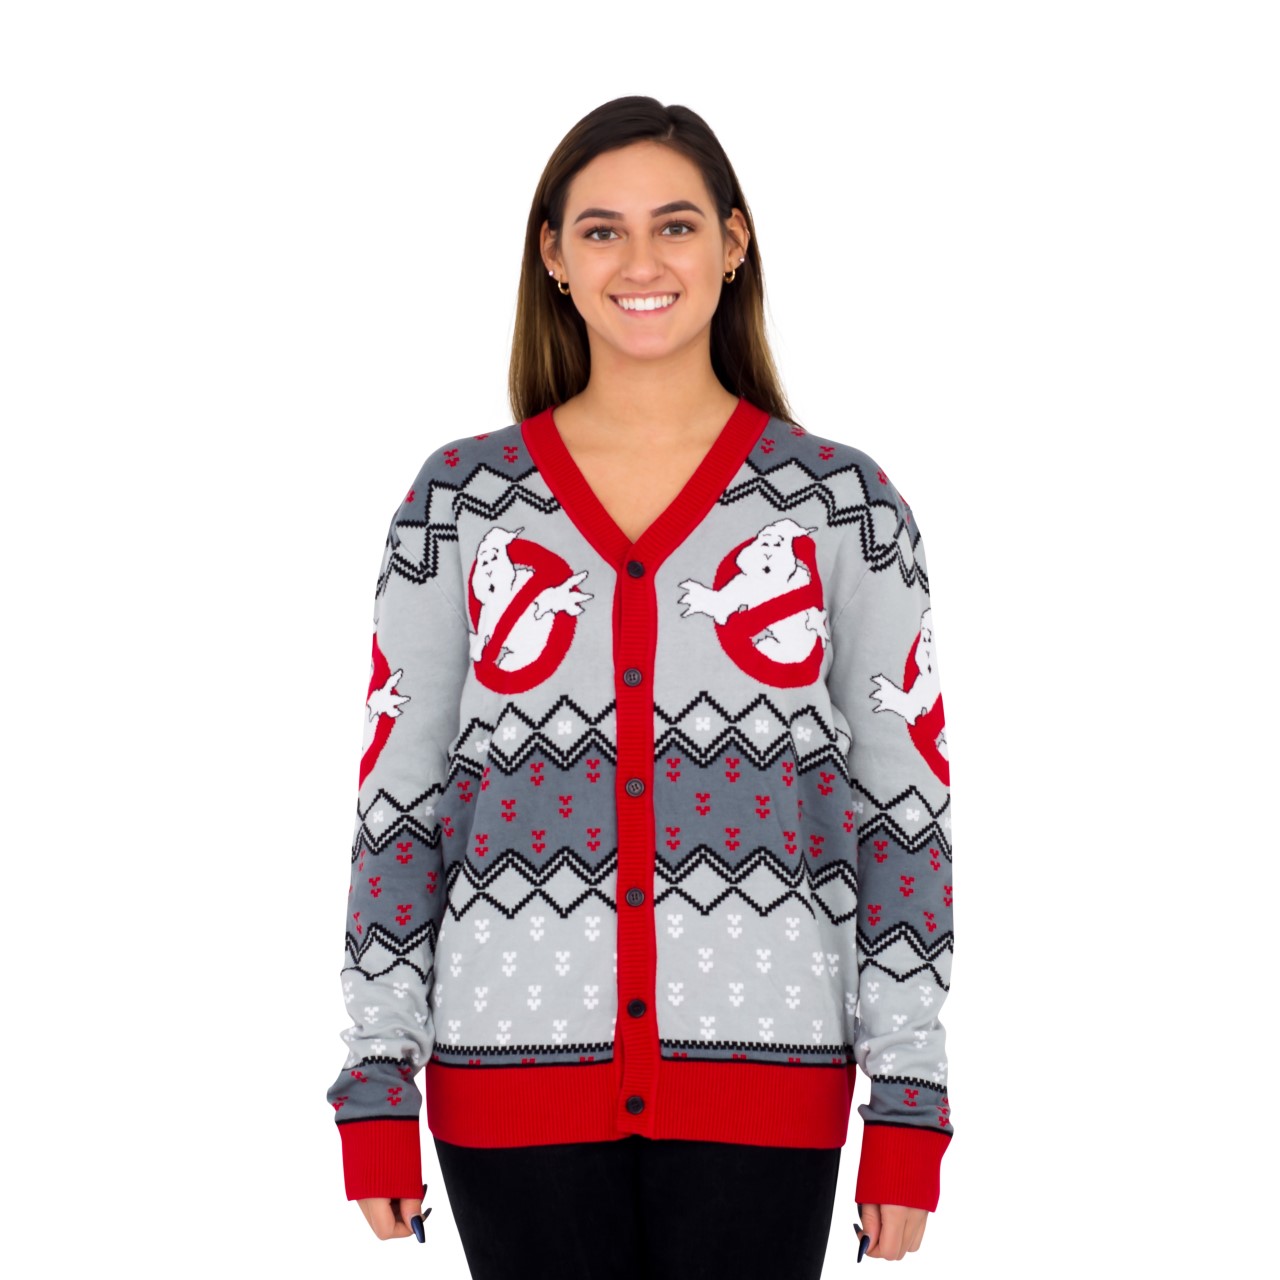 Women’s Ghostbusters Logo Ugly Christmas Cardigan Sweater